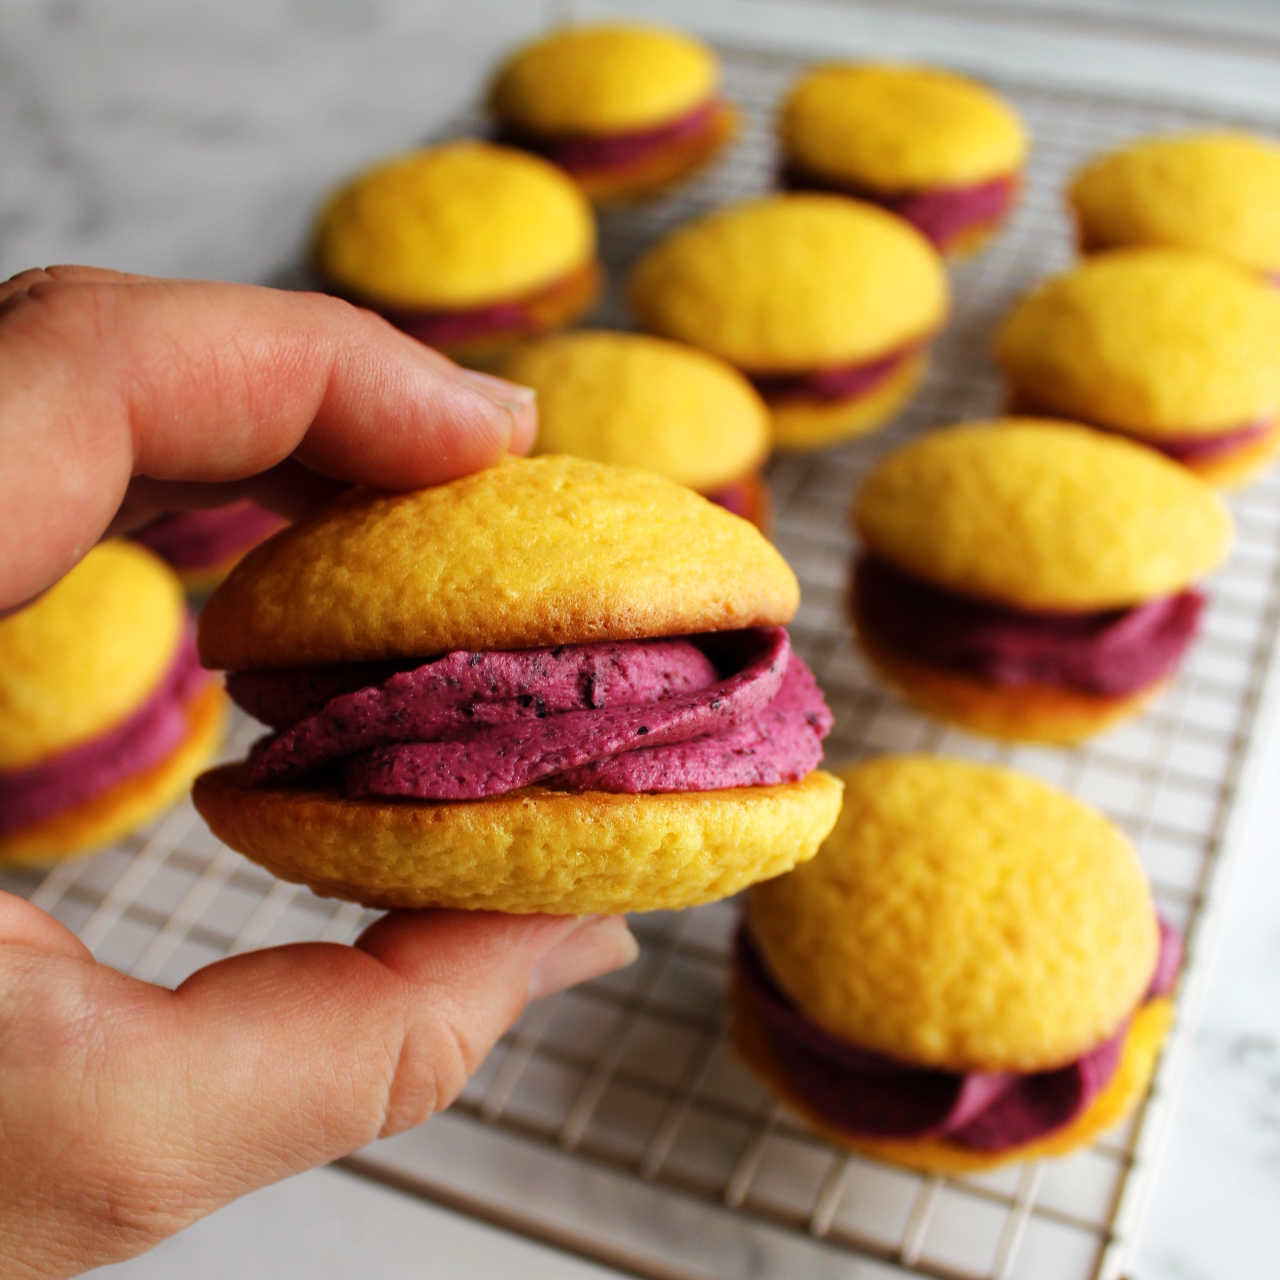 Hand holding lemon whoopie pie with rounded cakelike cookies sandwiched around blueberry filling.